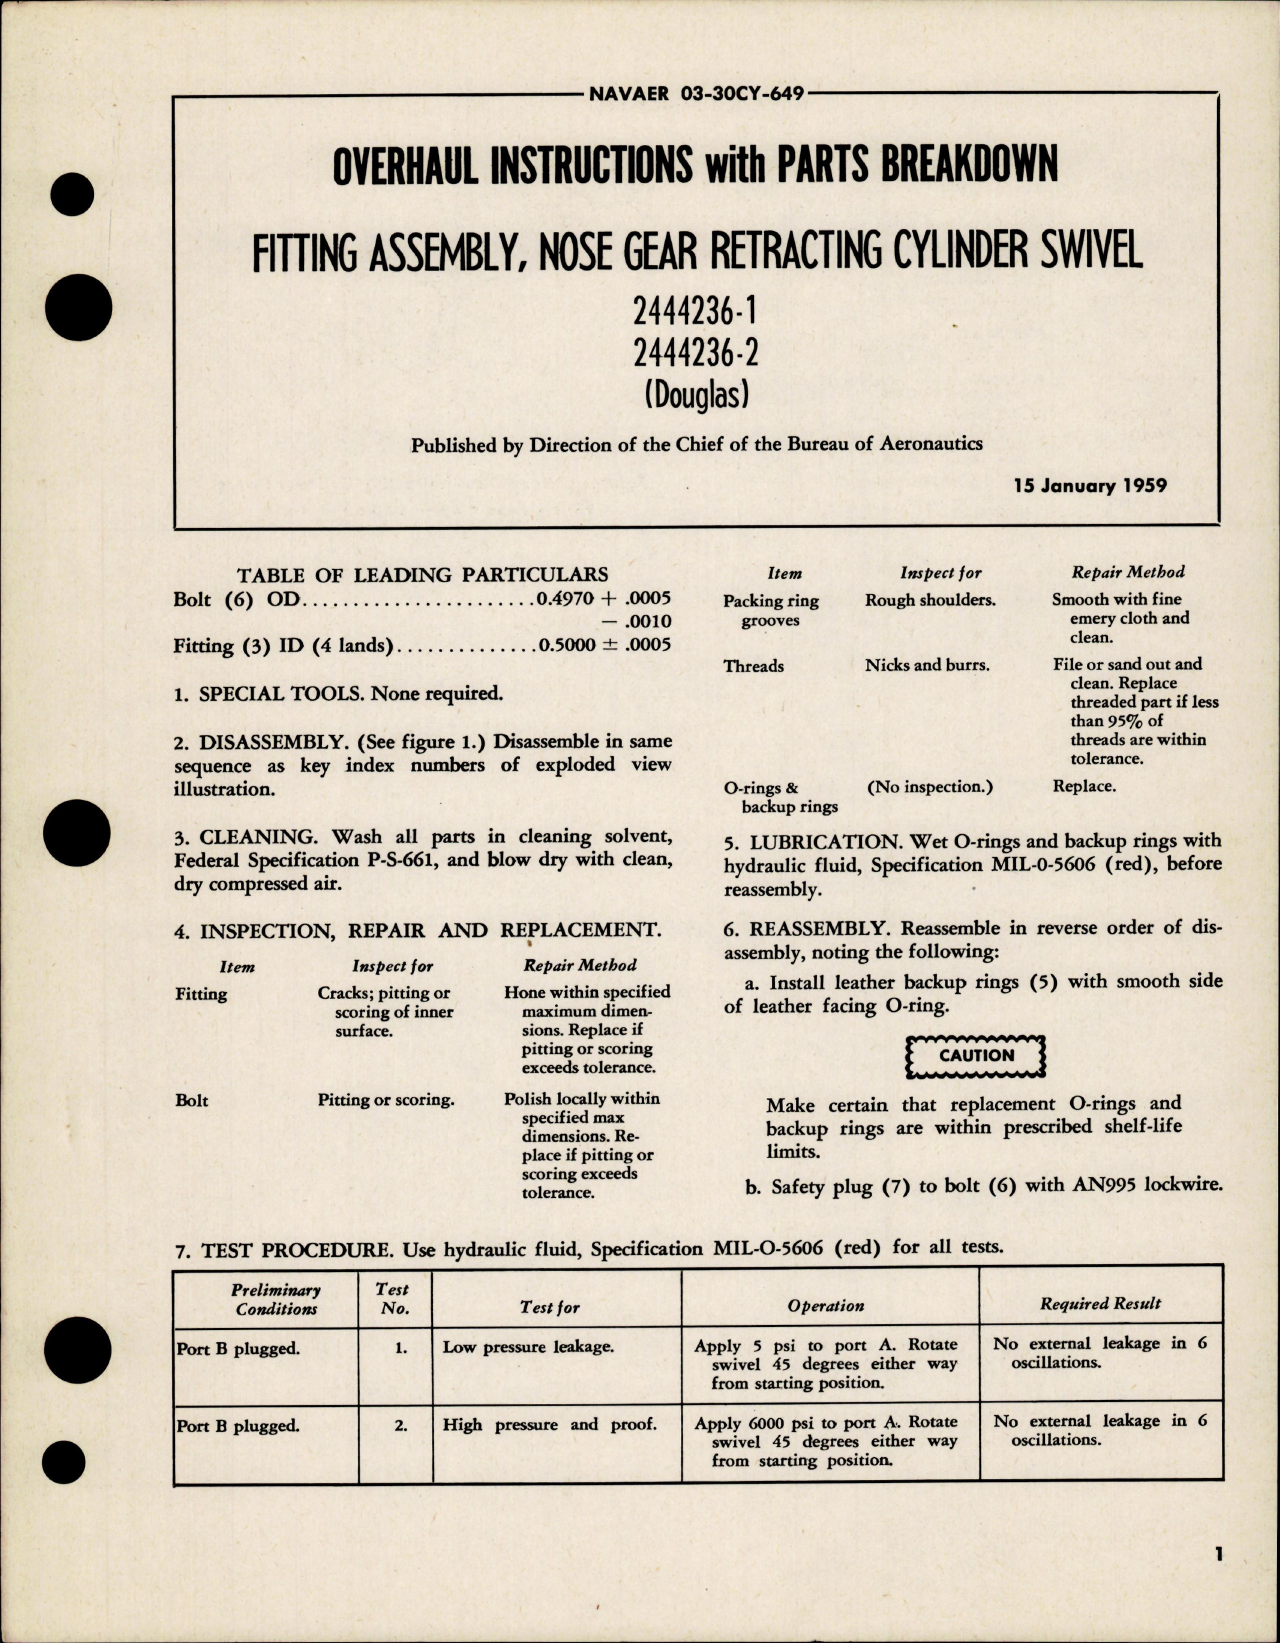 Sample page 1 from AirCorps Library document: Overhaul Instructions with Parts for Nose Gear Retracting Cylinder Swivel Fitting Assembly - 2444236-1 and 2444236-2